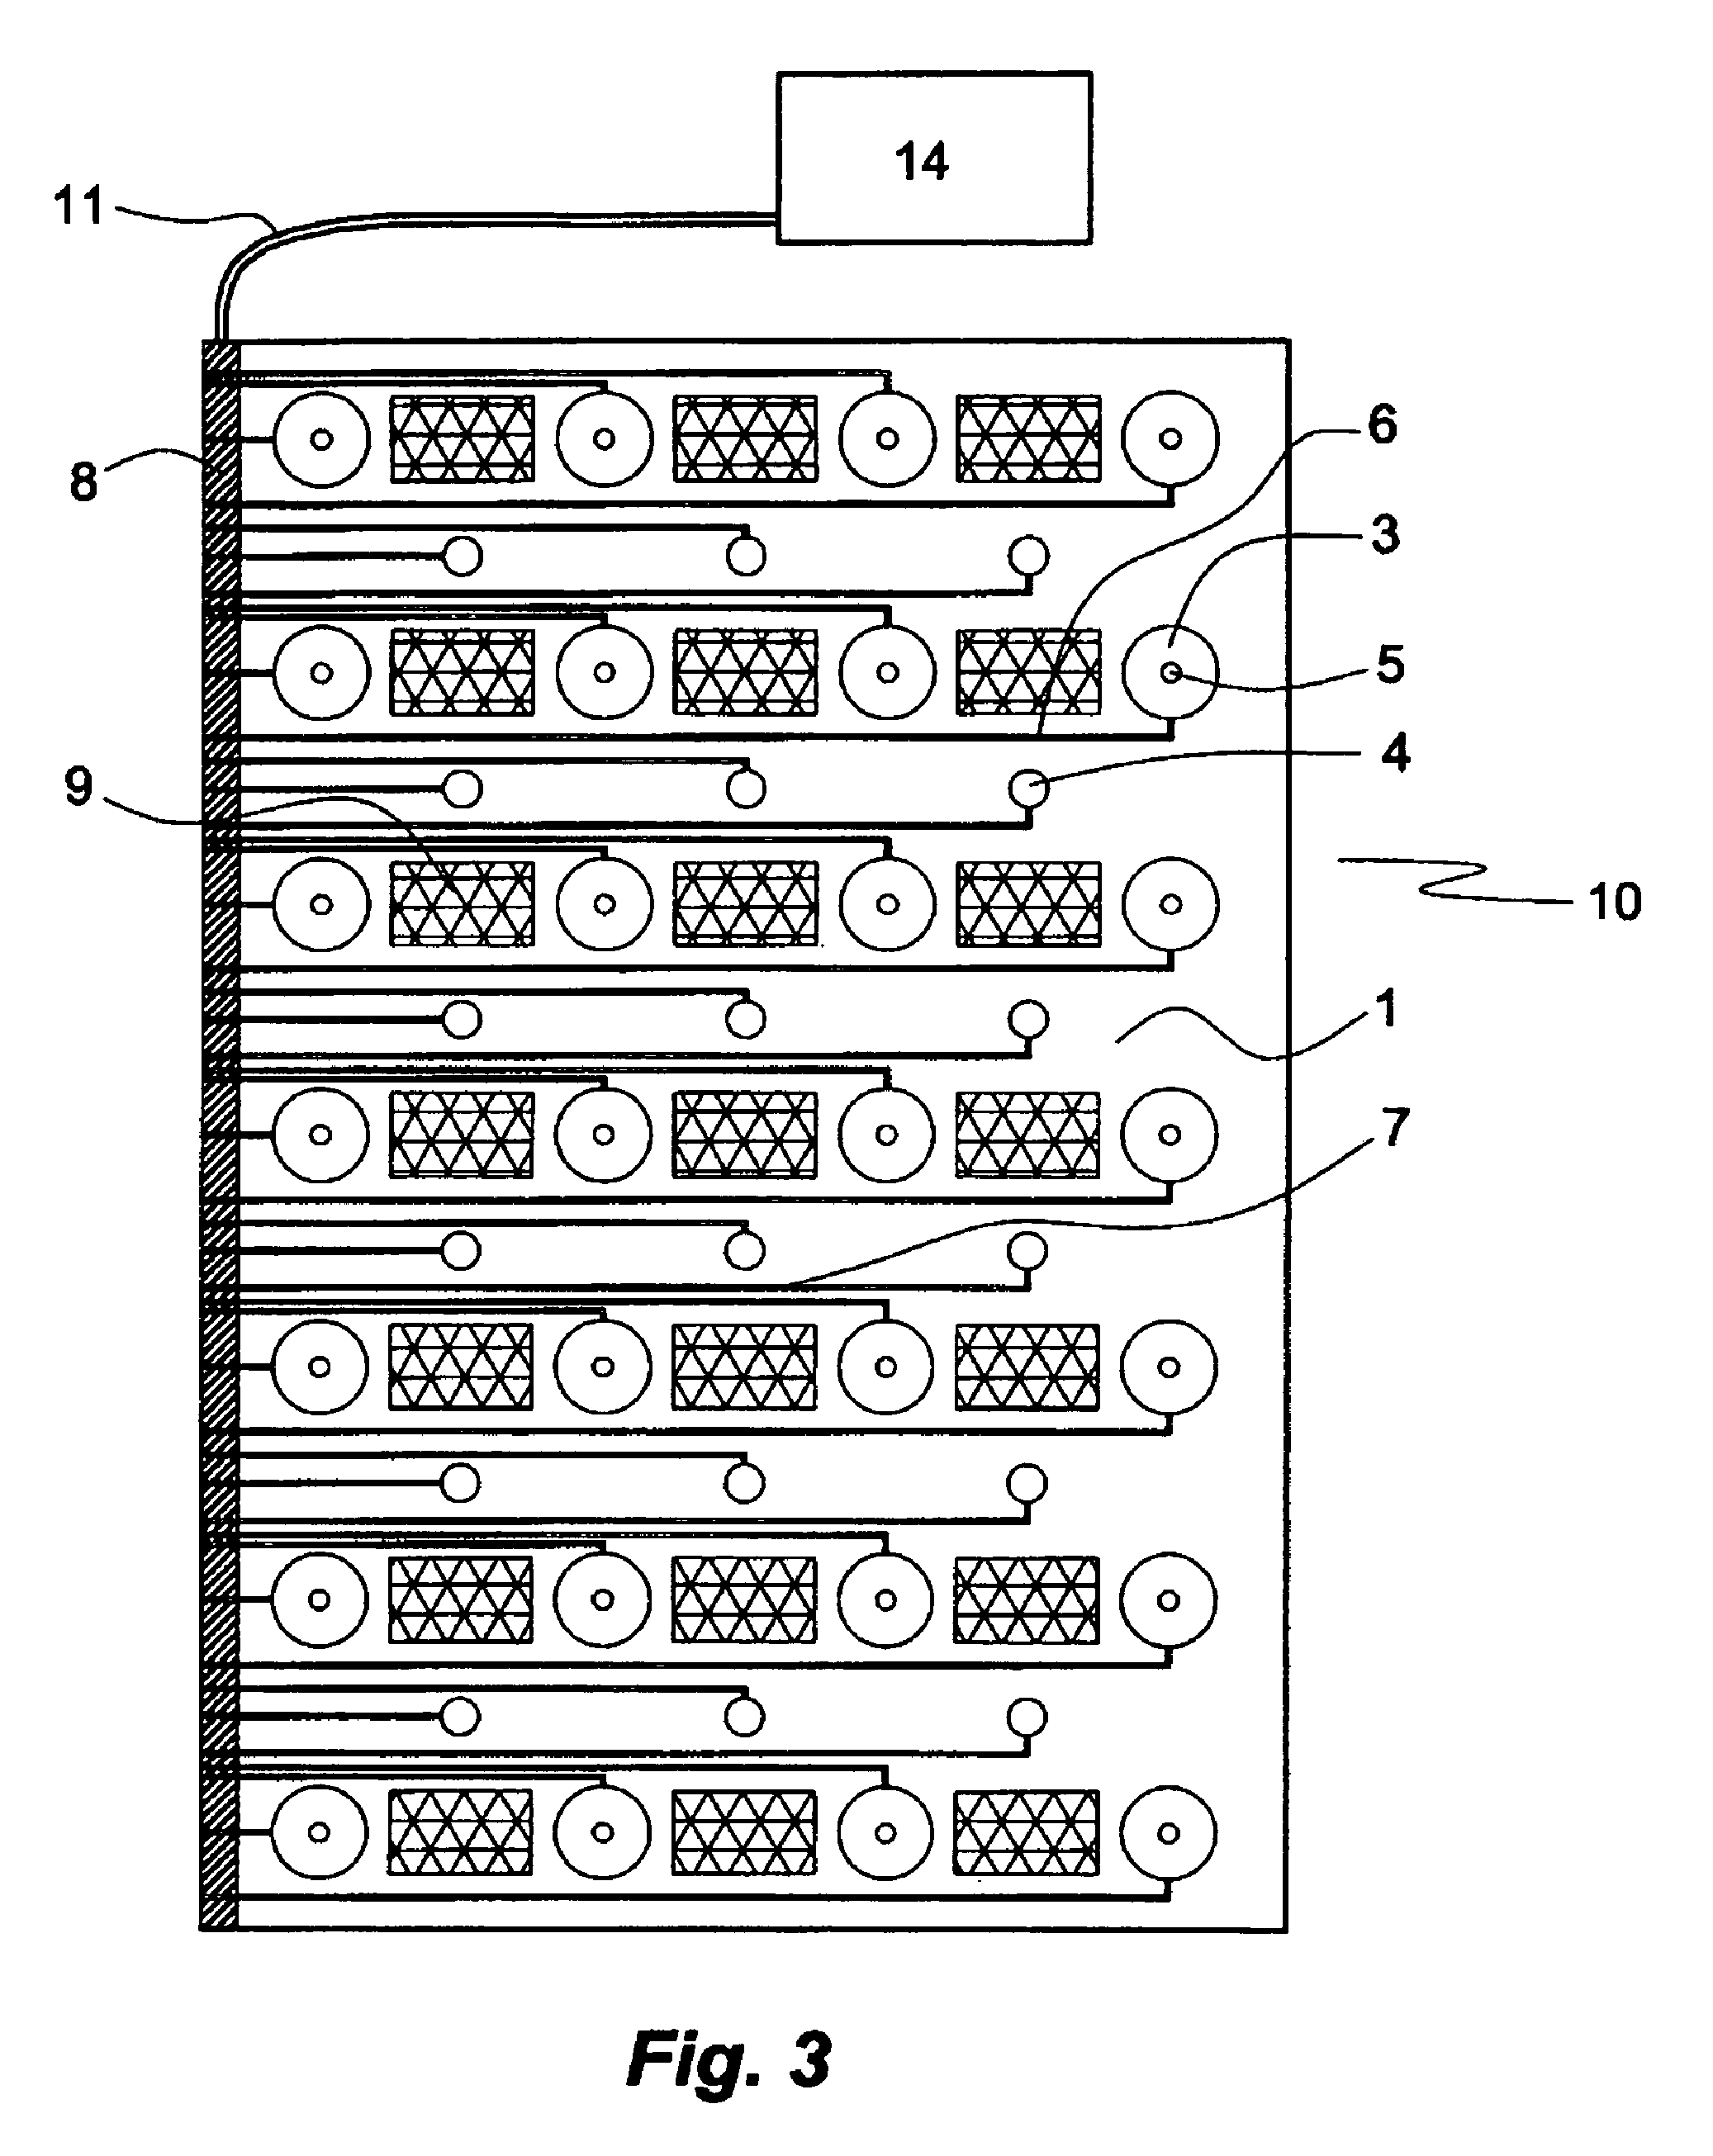 Method for electrical stimulation of cutaneous sensory receptors